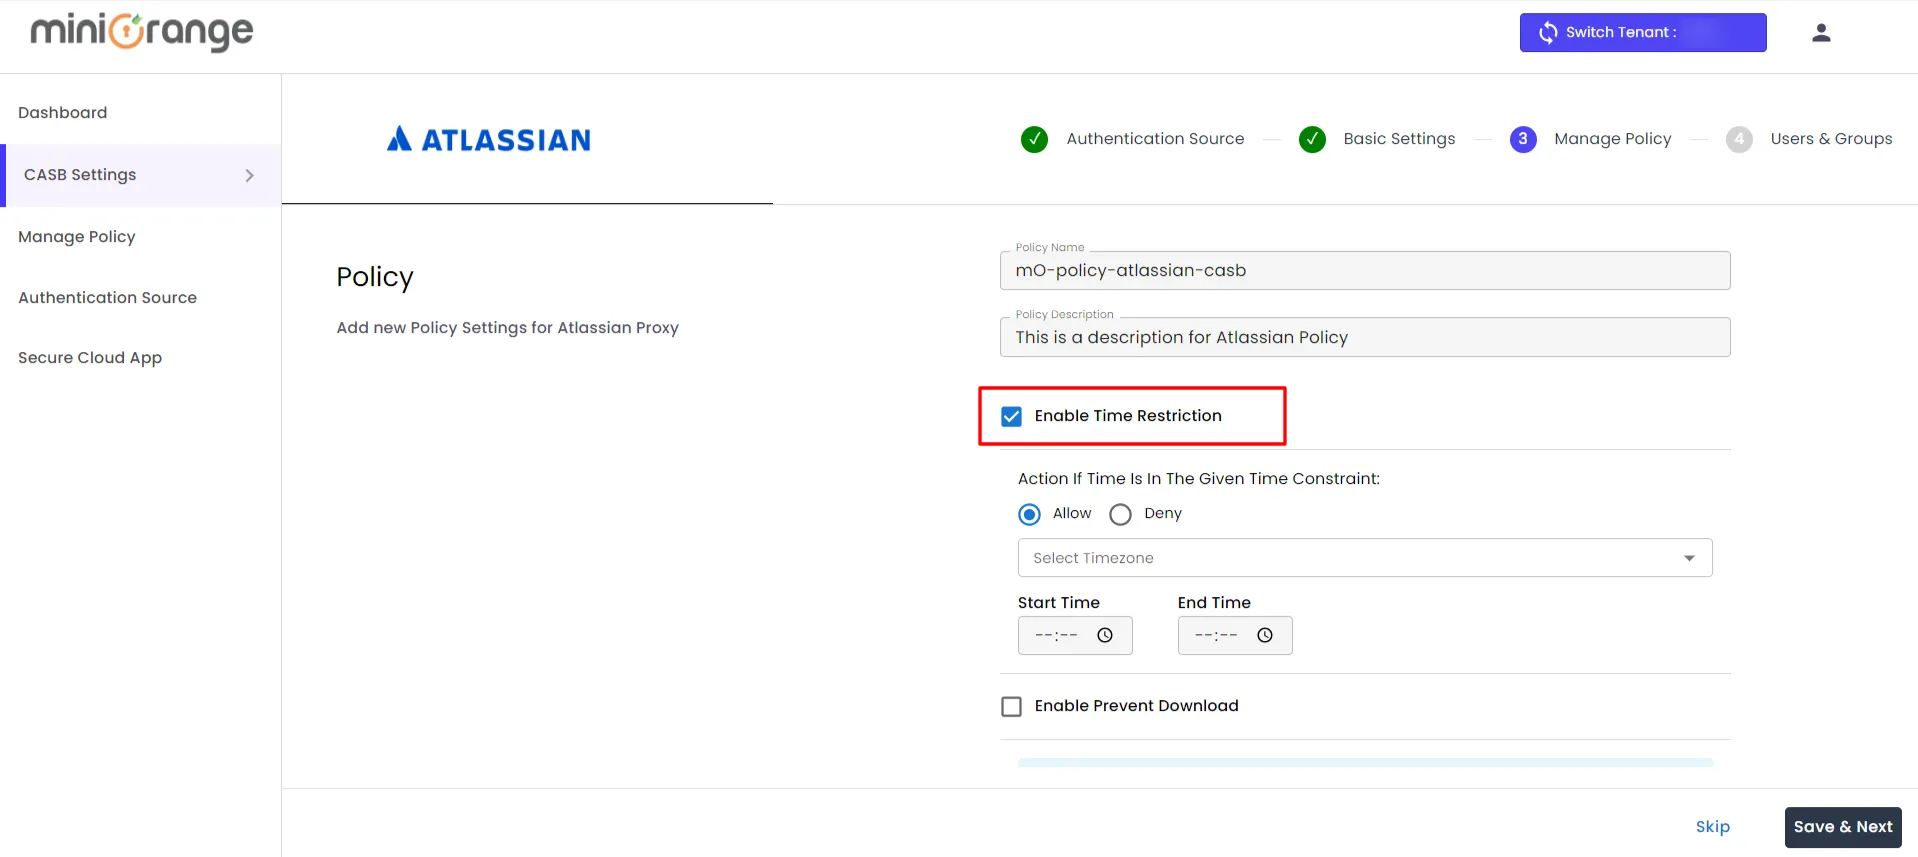 Atlassian CASB policies enable Time Restriction